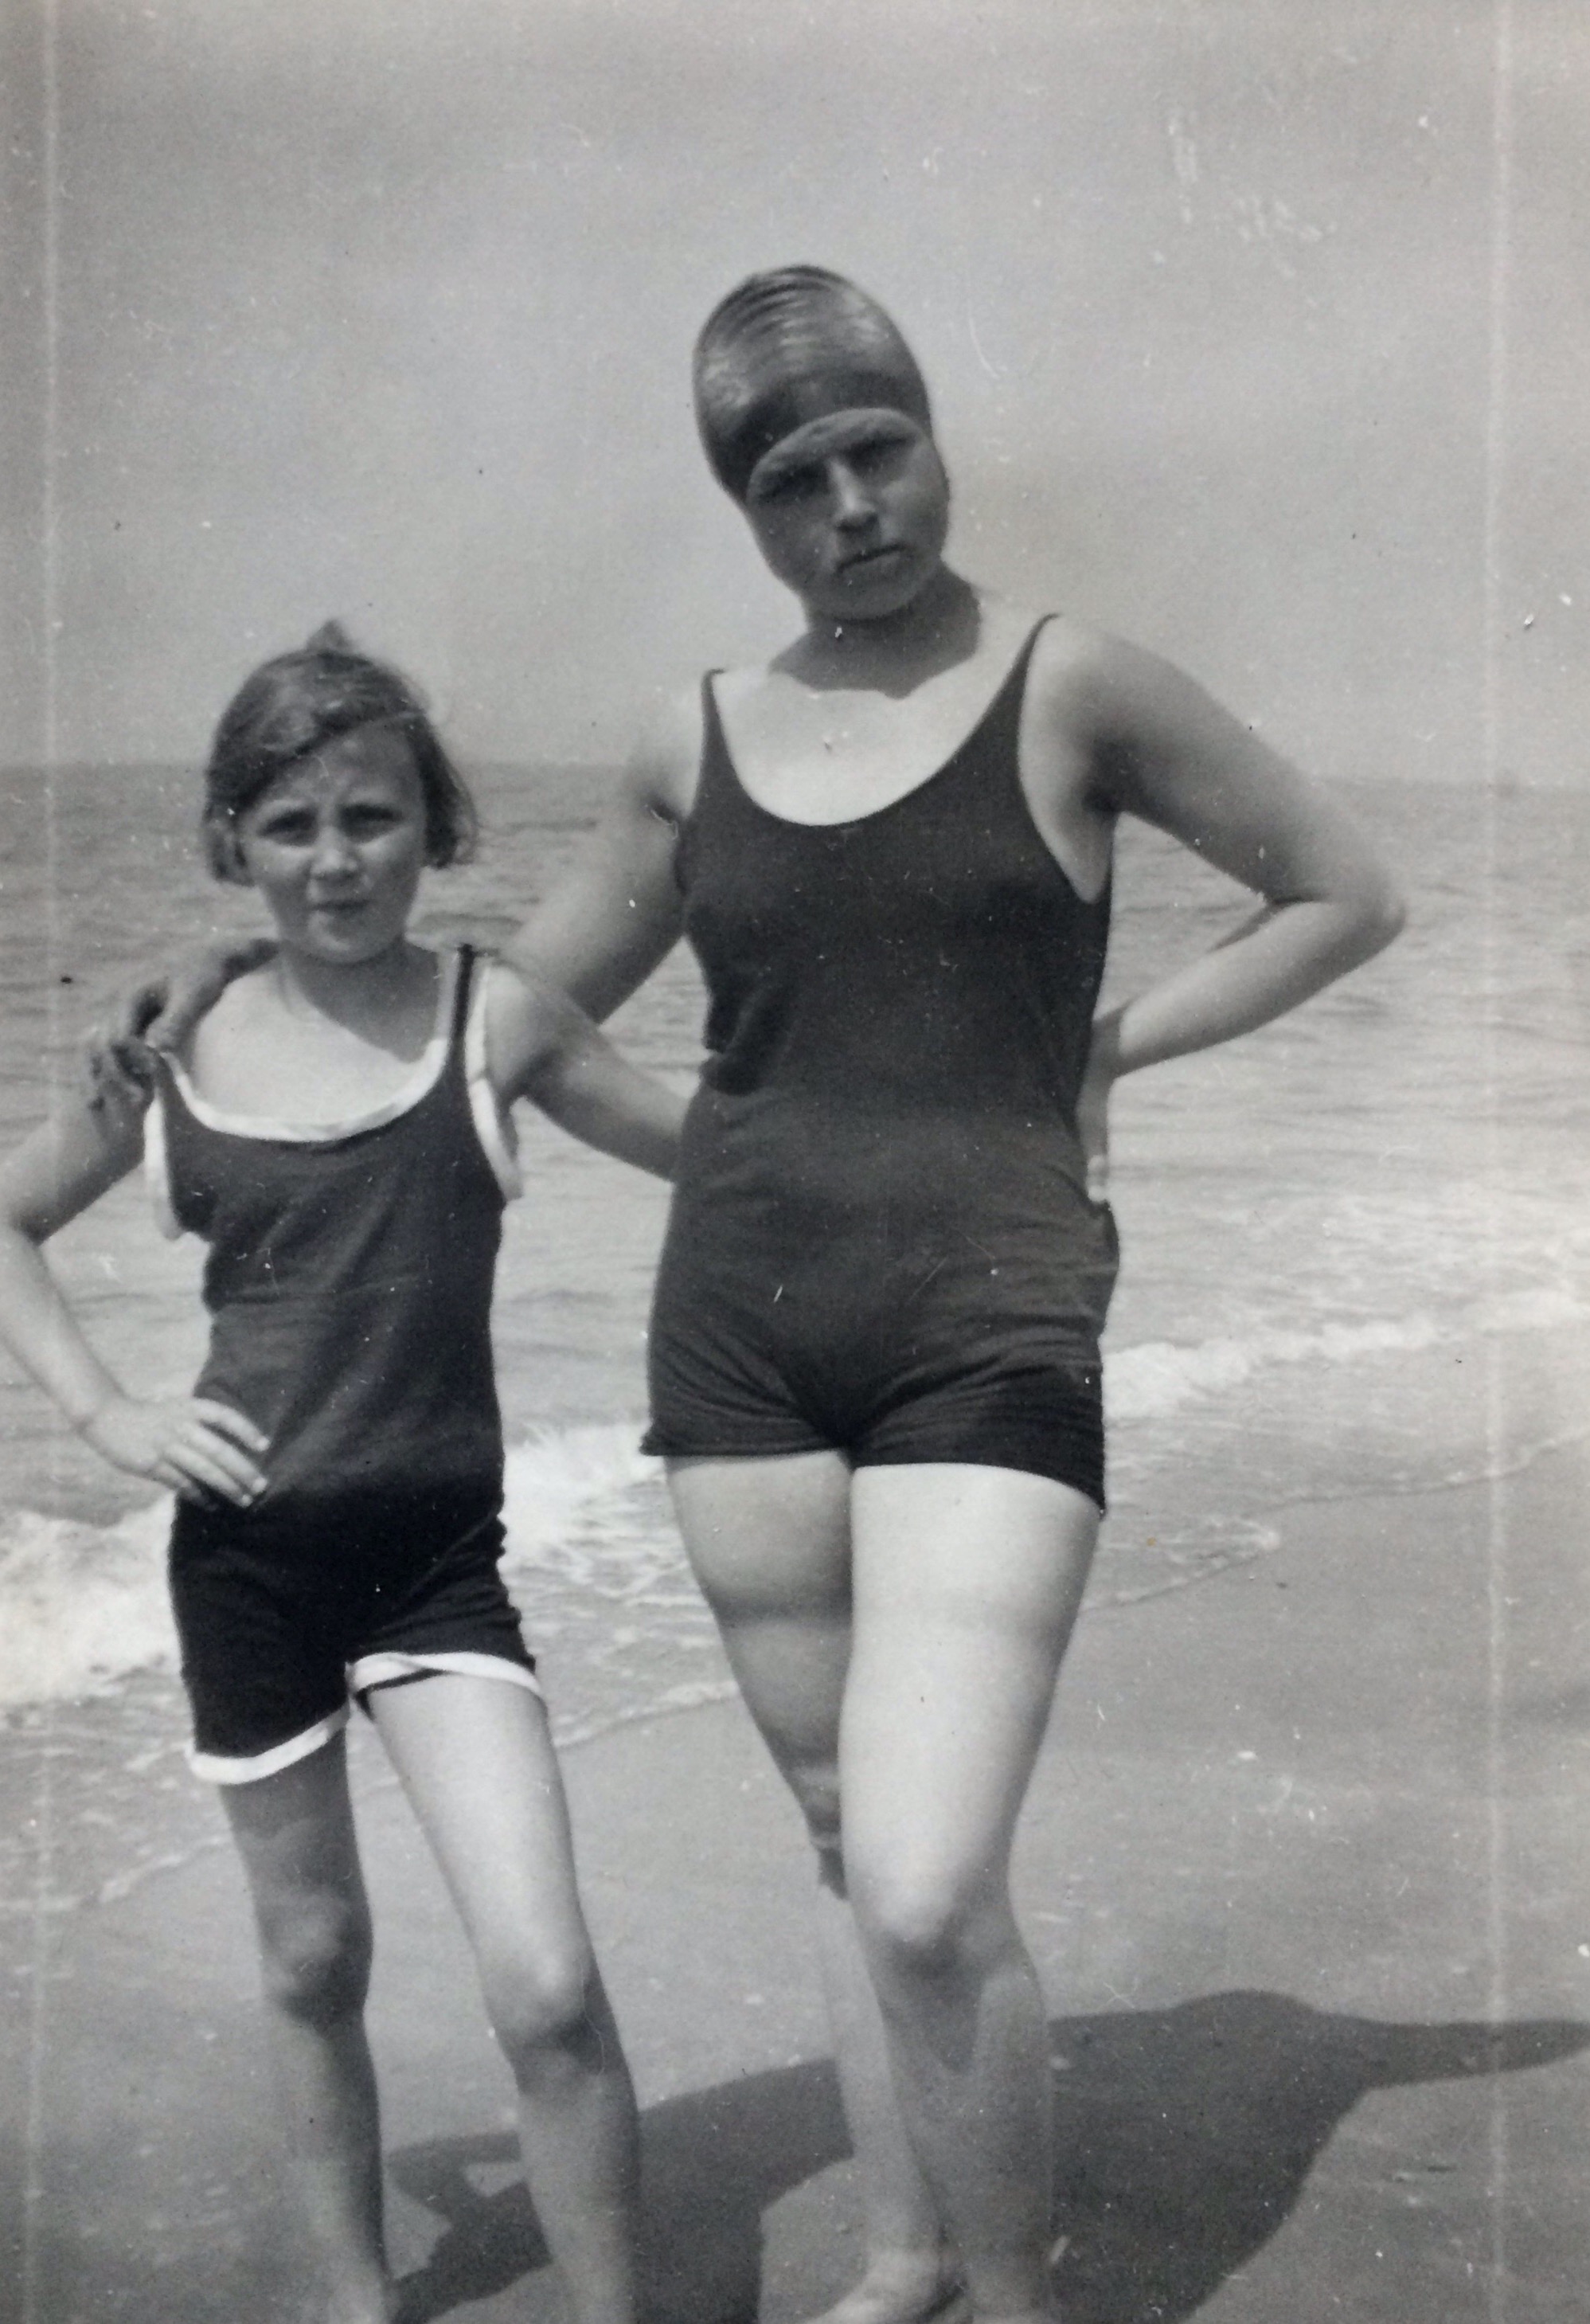 Ma 12 years old with her big sister, Zanvoort 1932